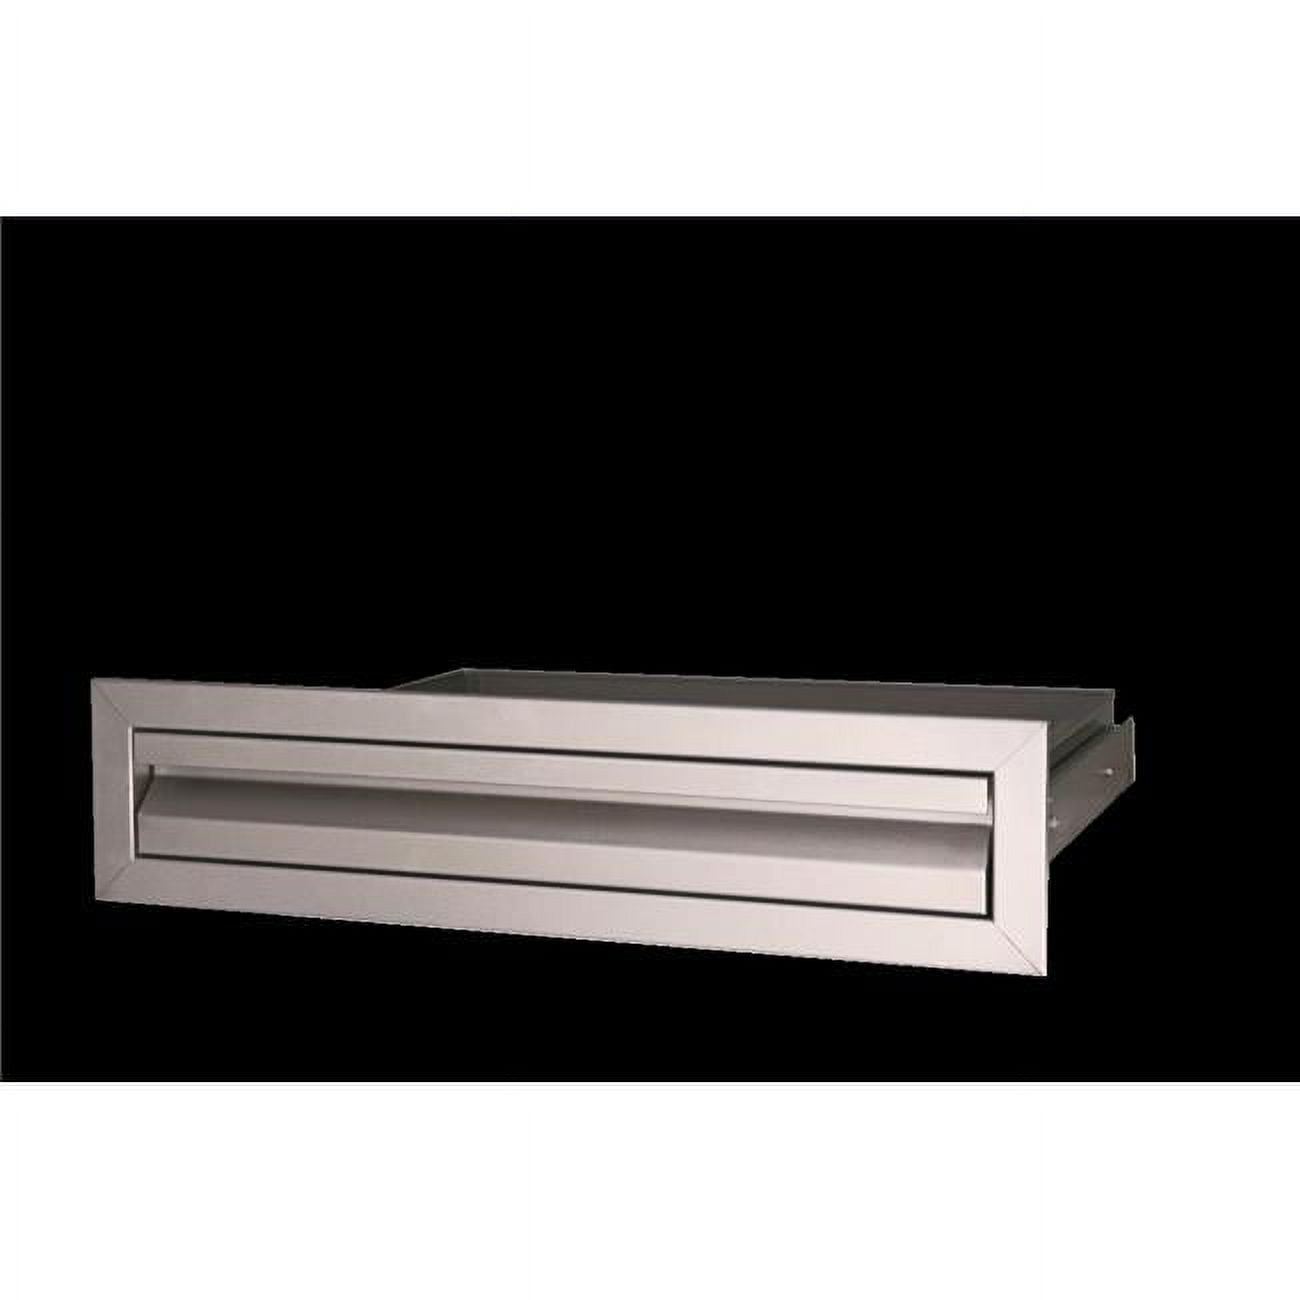 Vdu1 Valiant Stainless Accessory & Tool Drawer